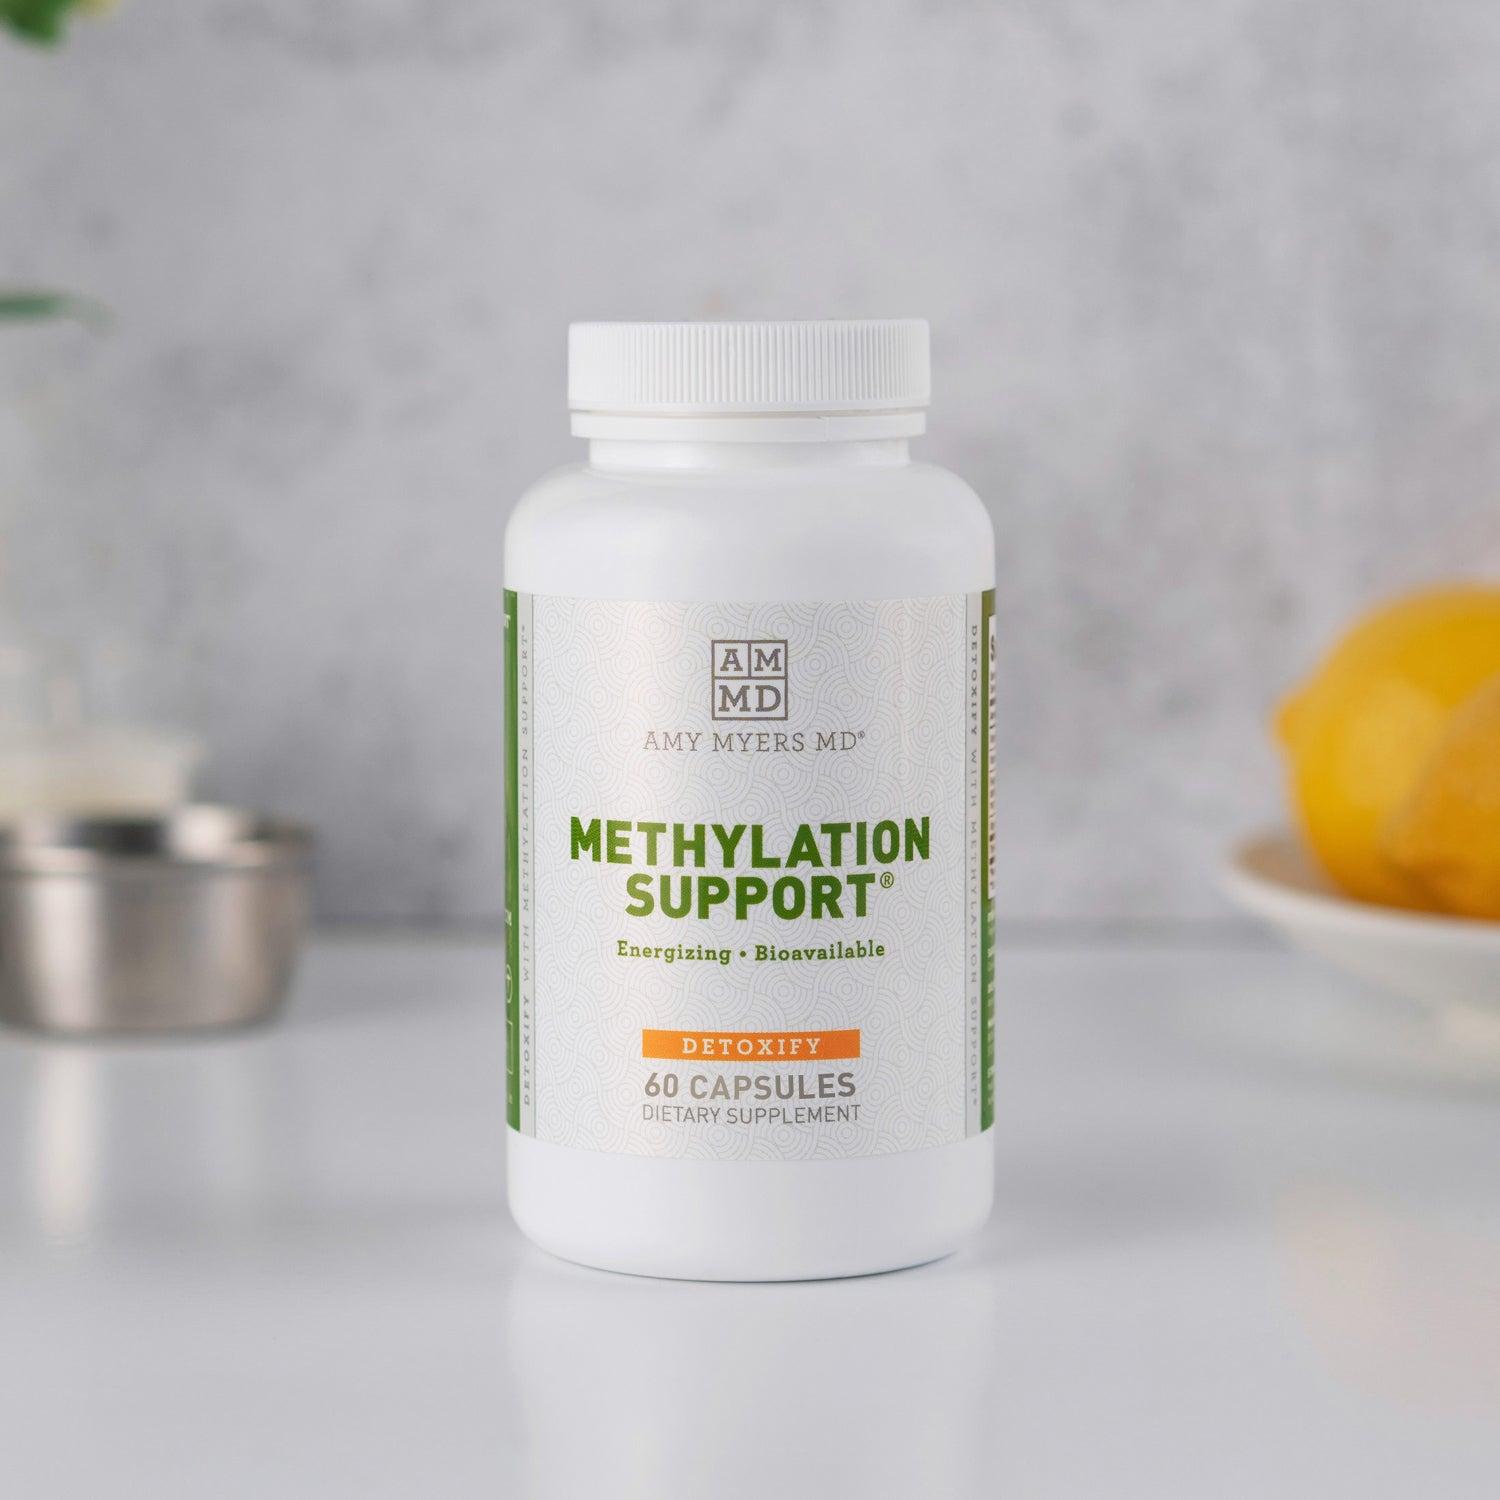 Methylation support supplement, 60 capsules - Amy Myers MD®